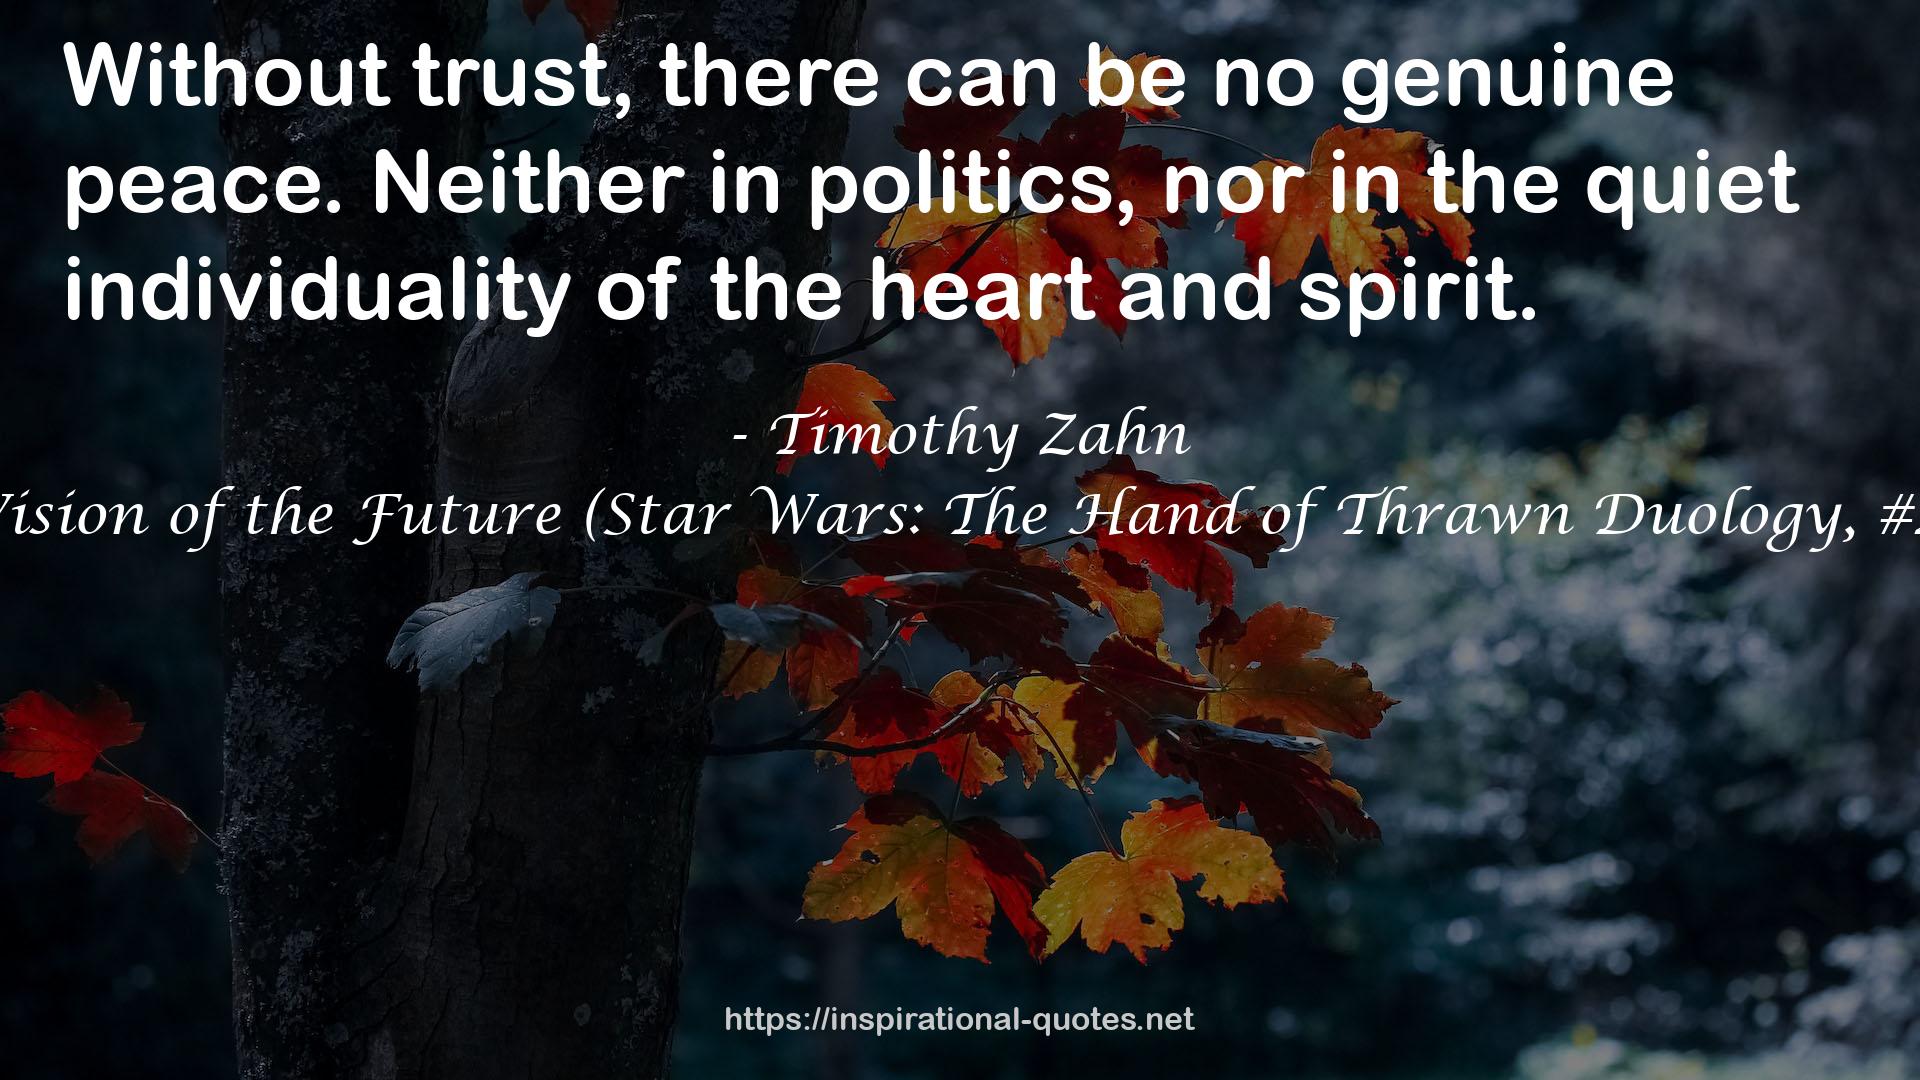 Vision of the Future (Star Wars: The Hand of Thrawn Duology, #2) QUOTES